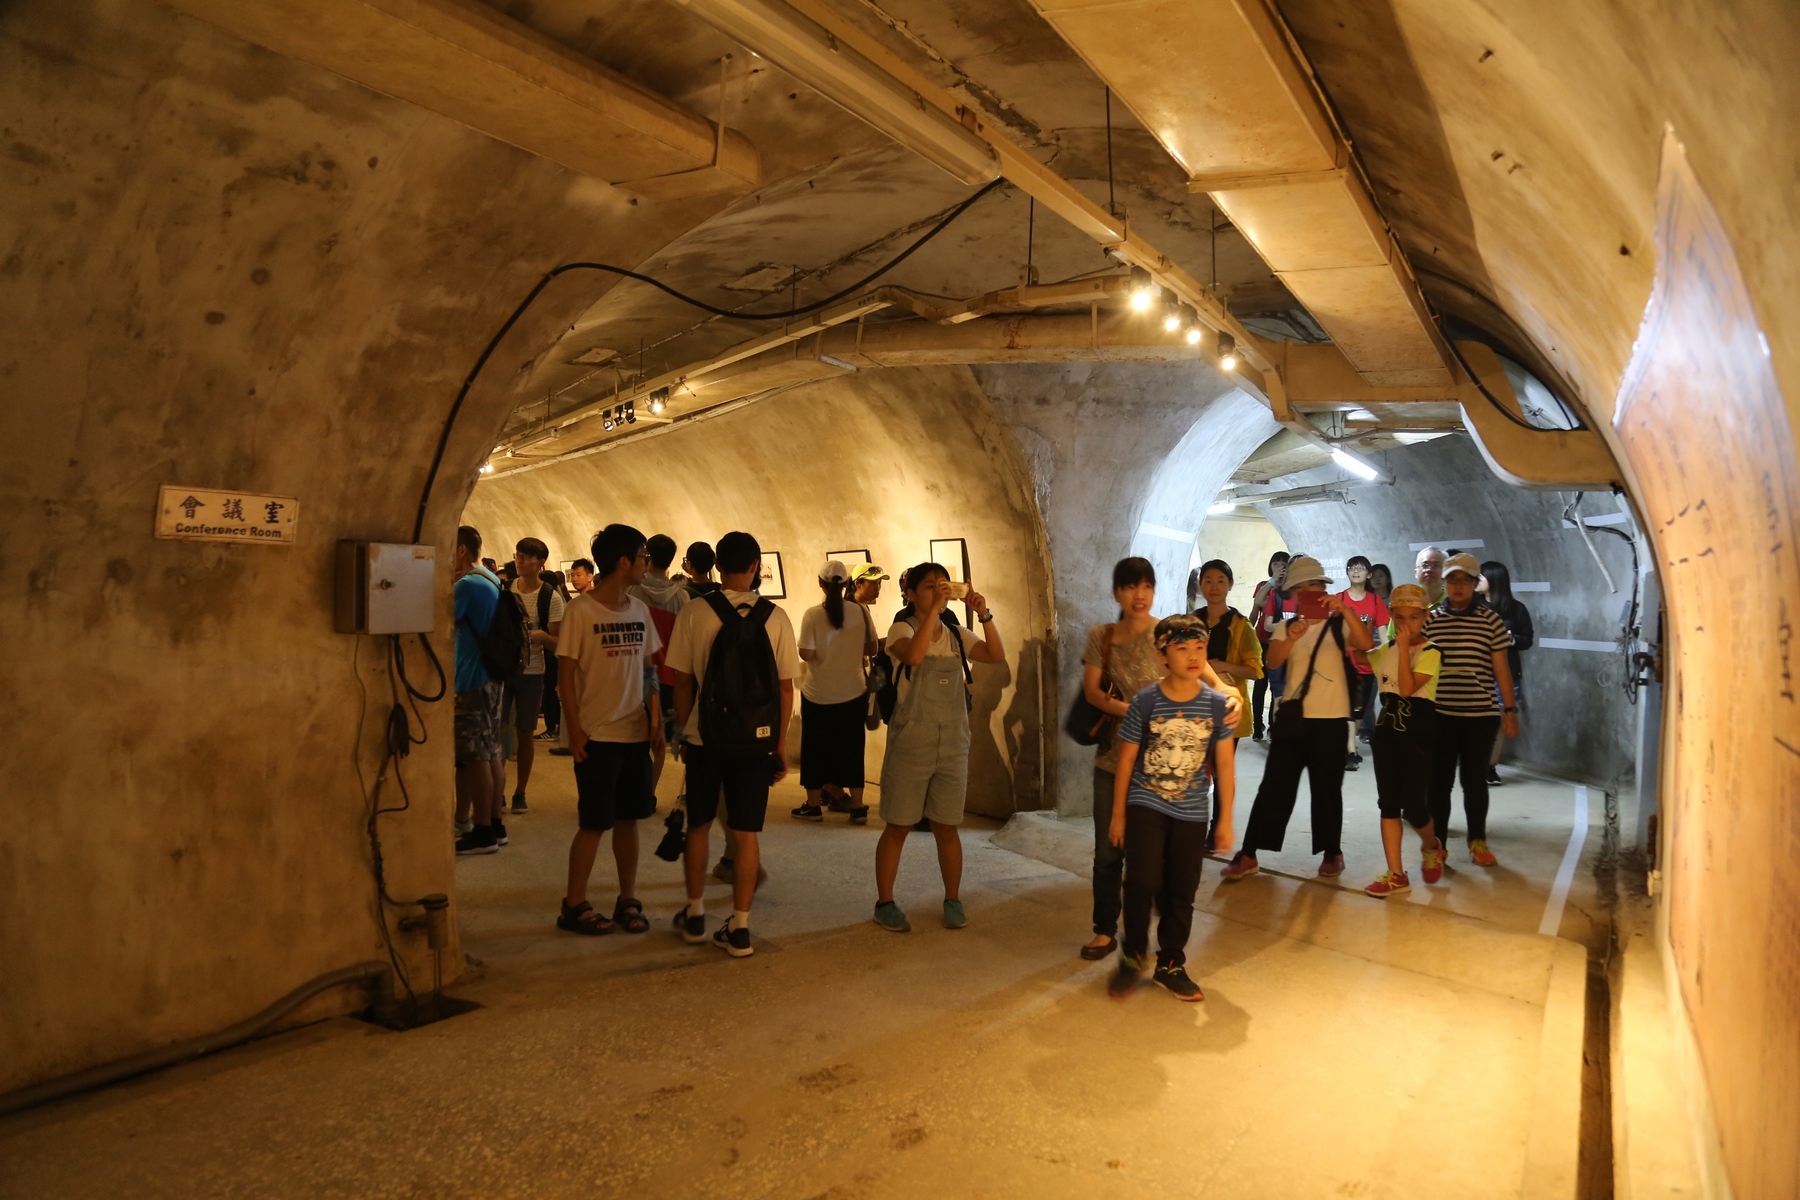 The opening of the historic tunnel attracts more than 500 visitors.